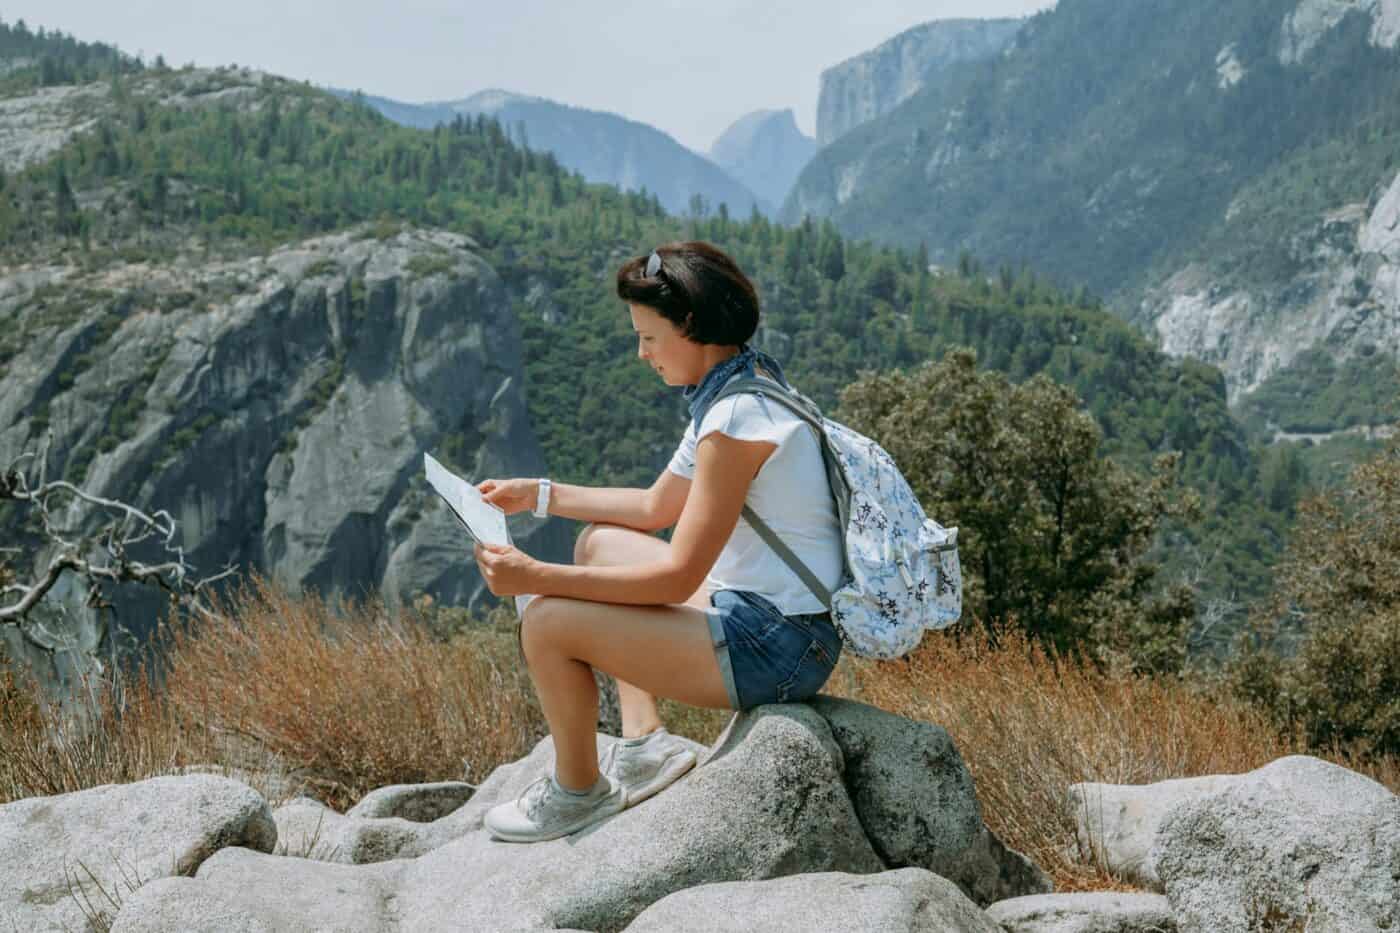 Mountain hike. Woman admiring epic mountains view. Travel and explore concept.